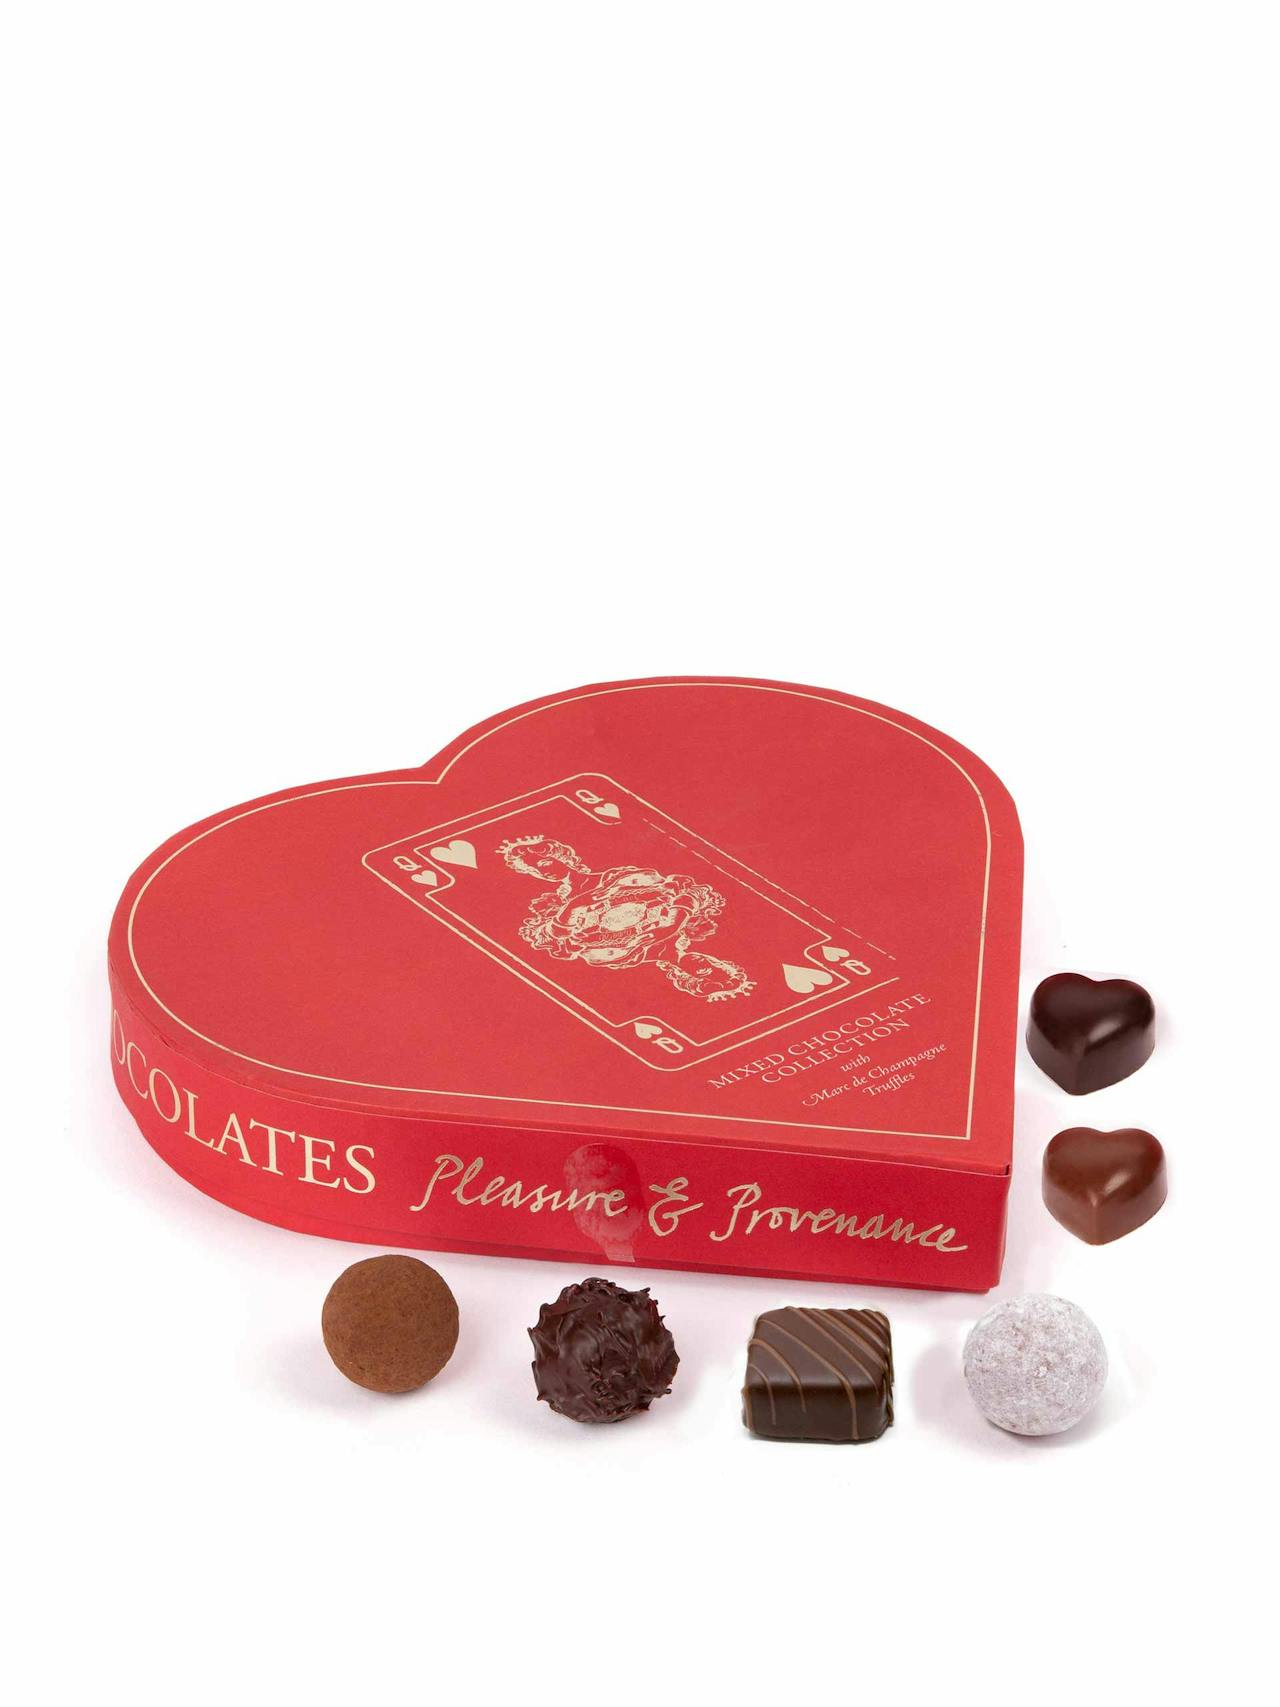 The queen of hearts box - mixed chocolates